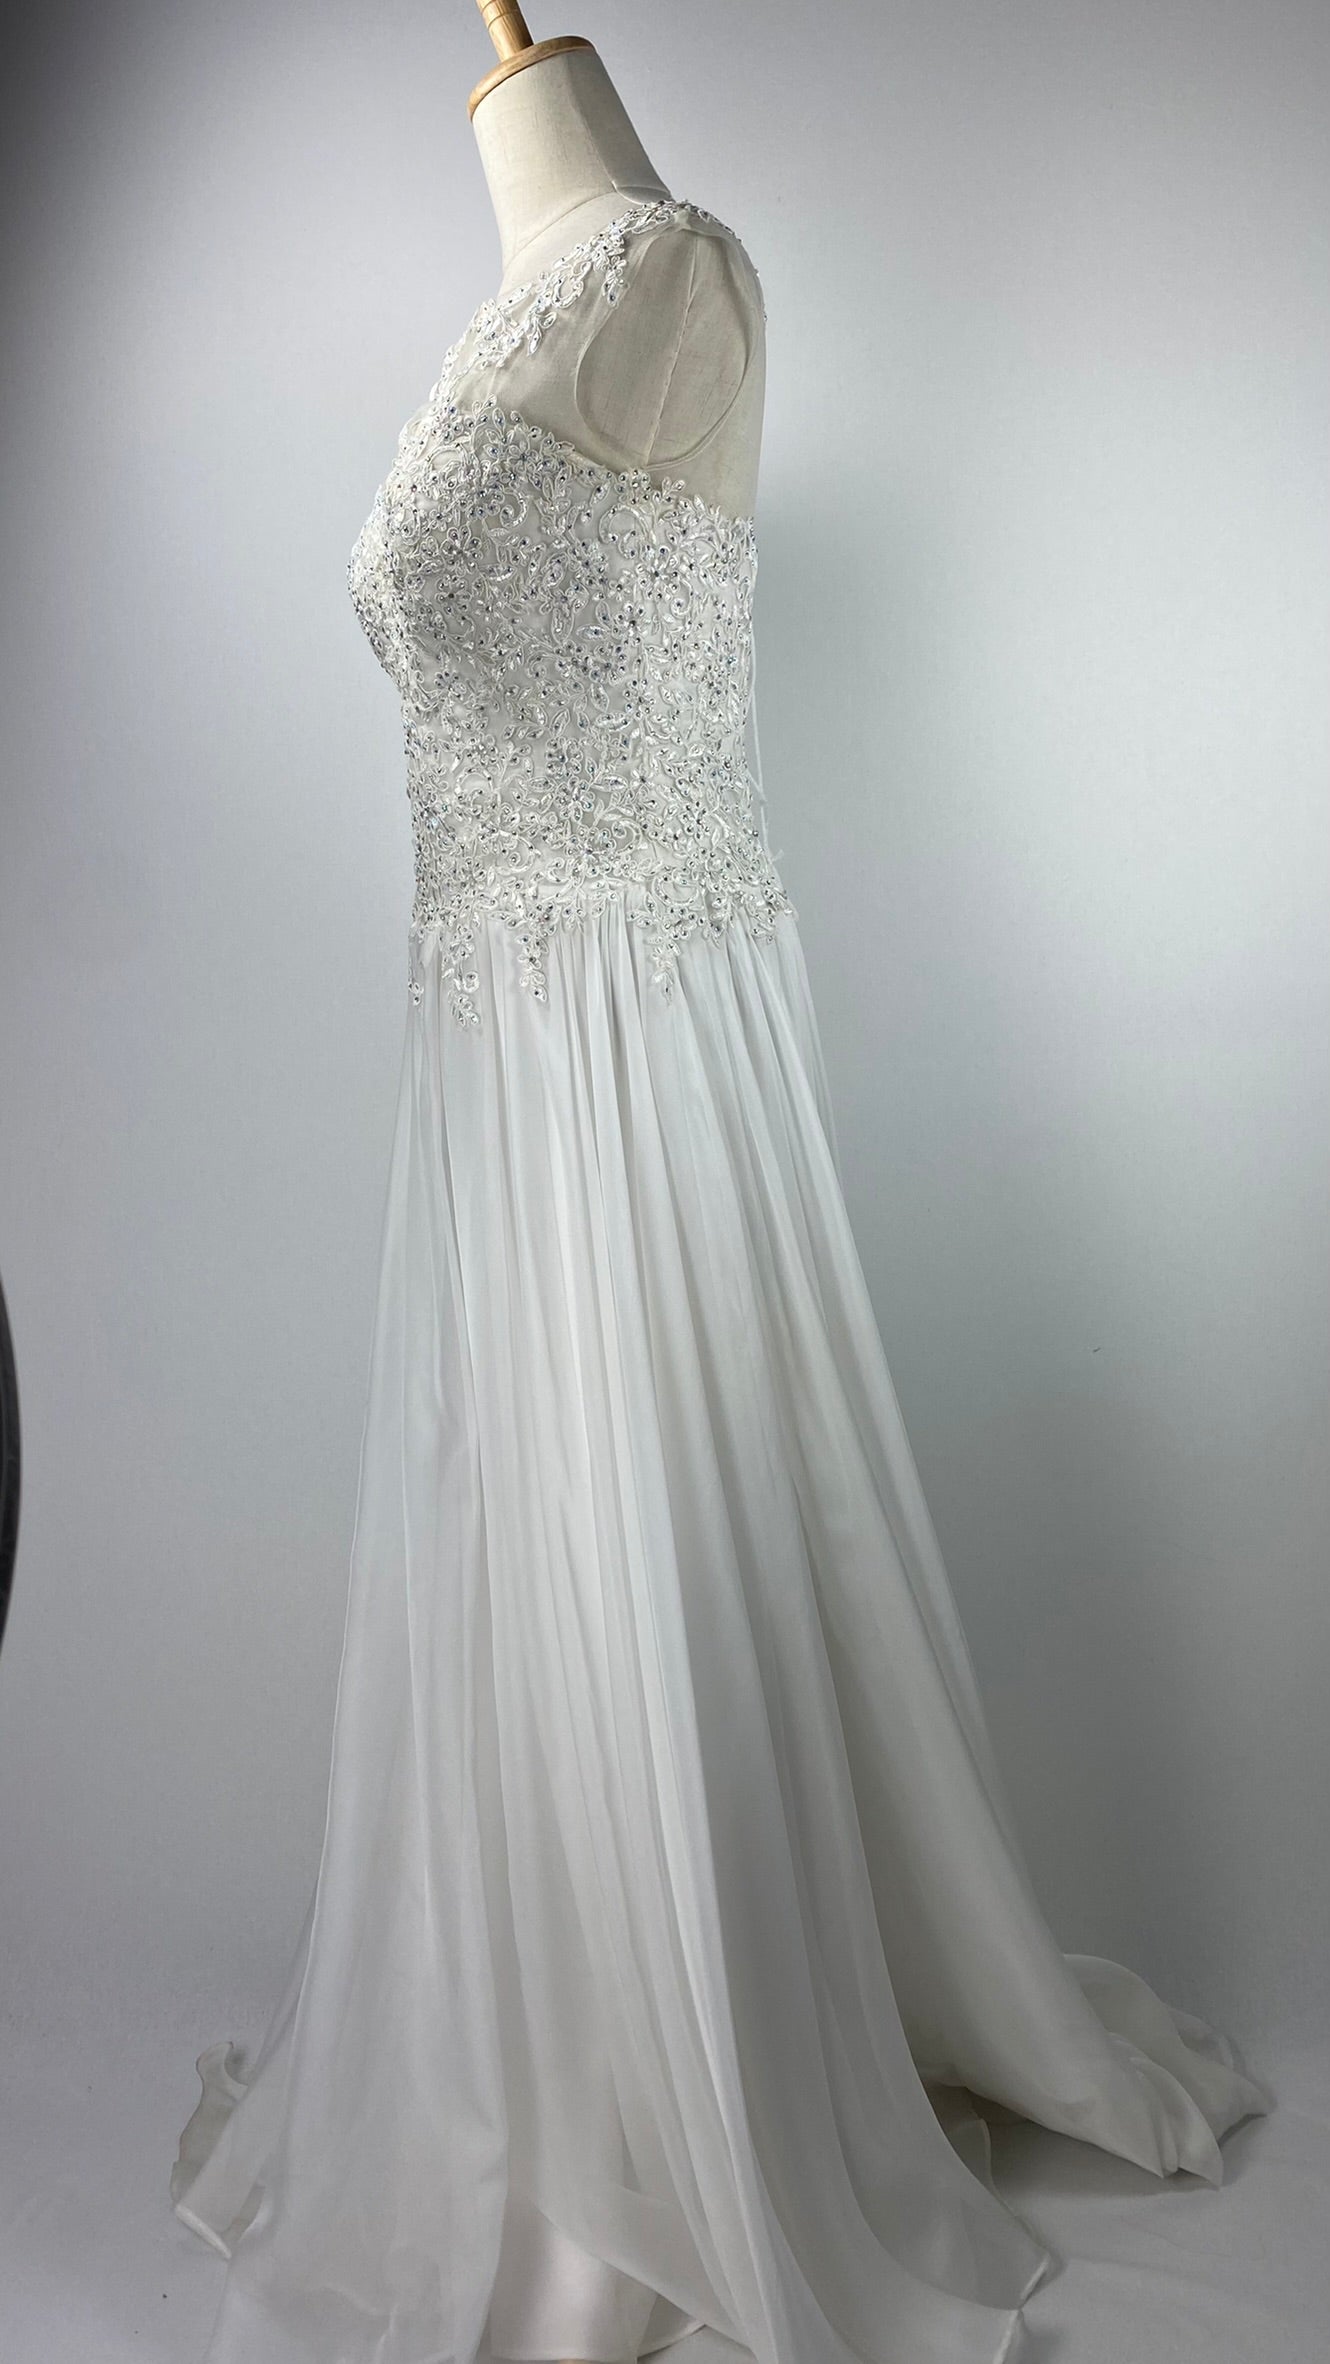 Cap Sleeve Bridal Gown with Beading on Bodice, Layered Chiffon Skirt